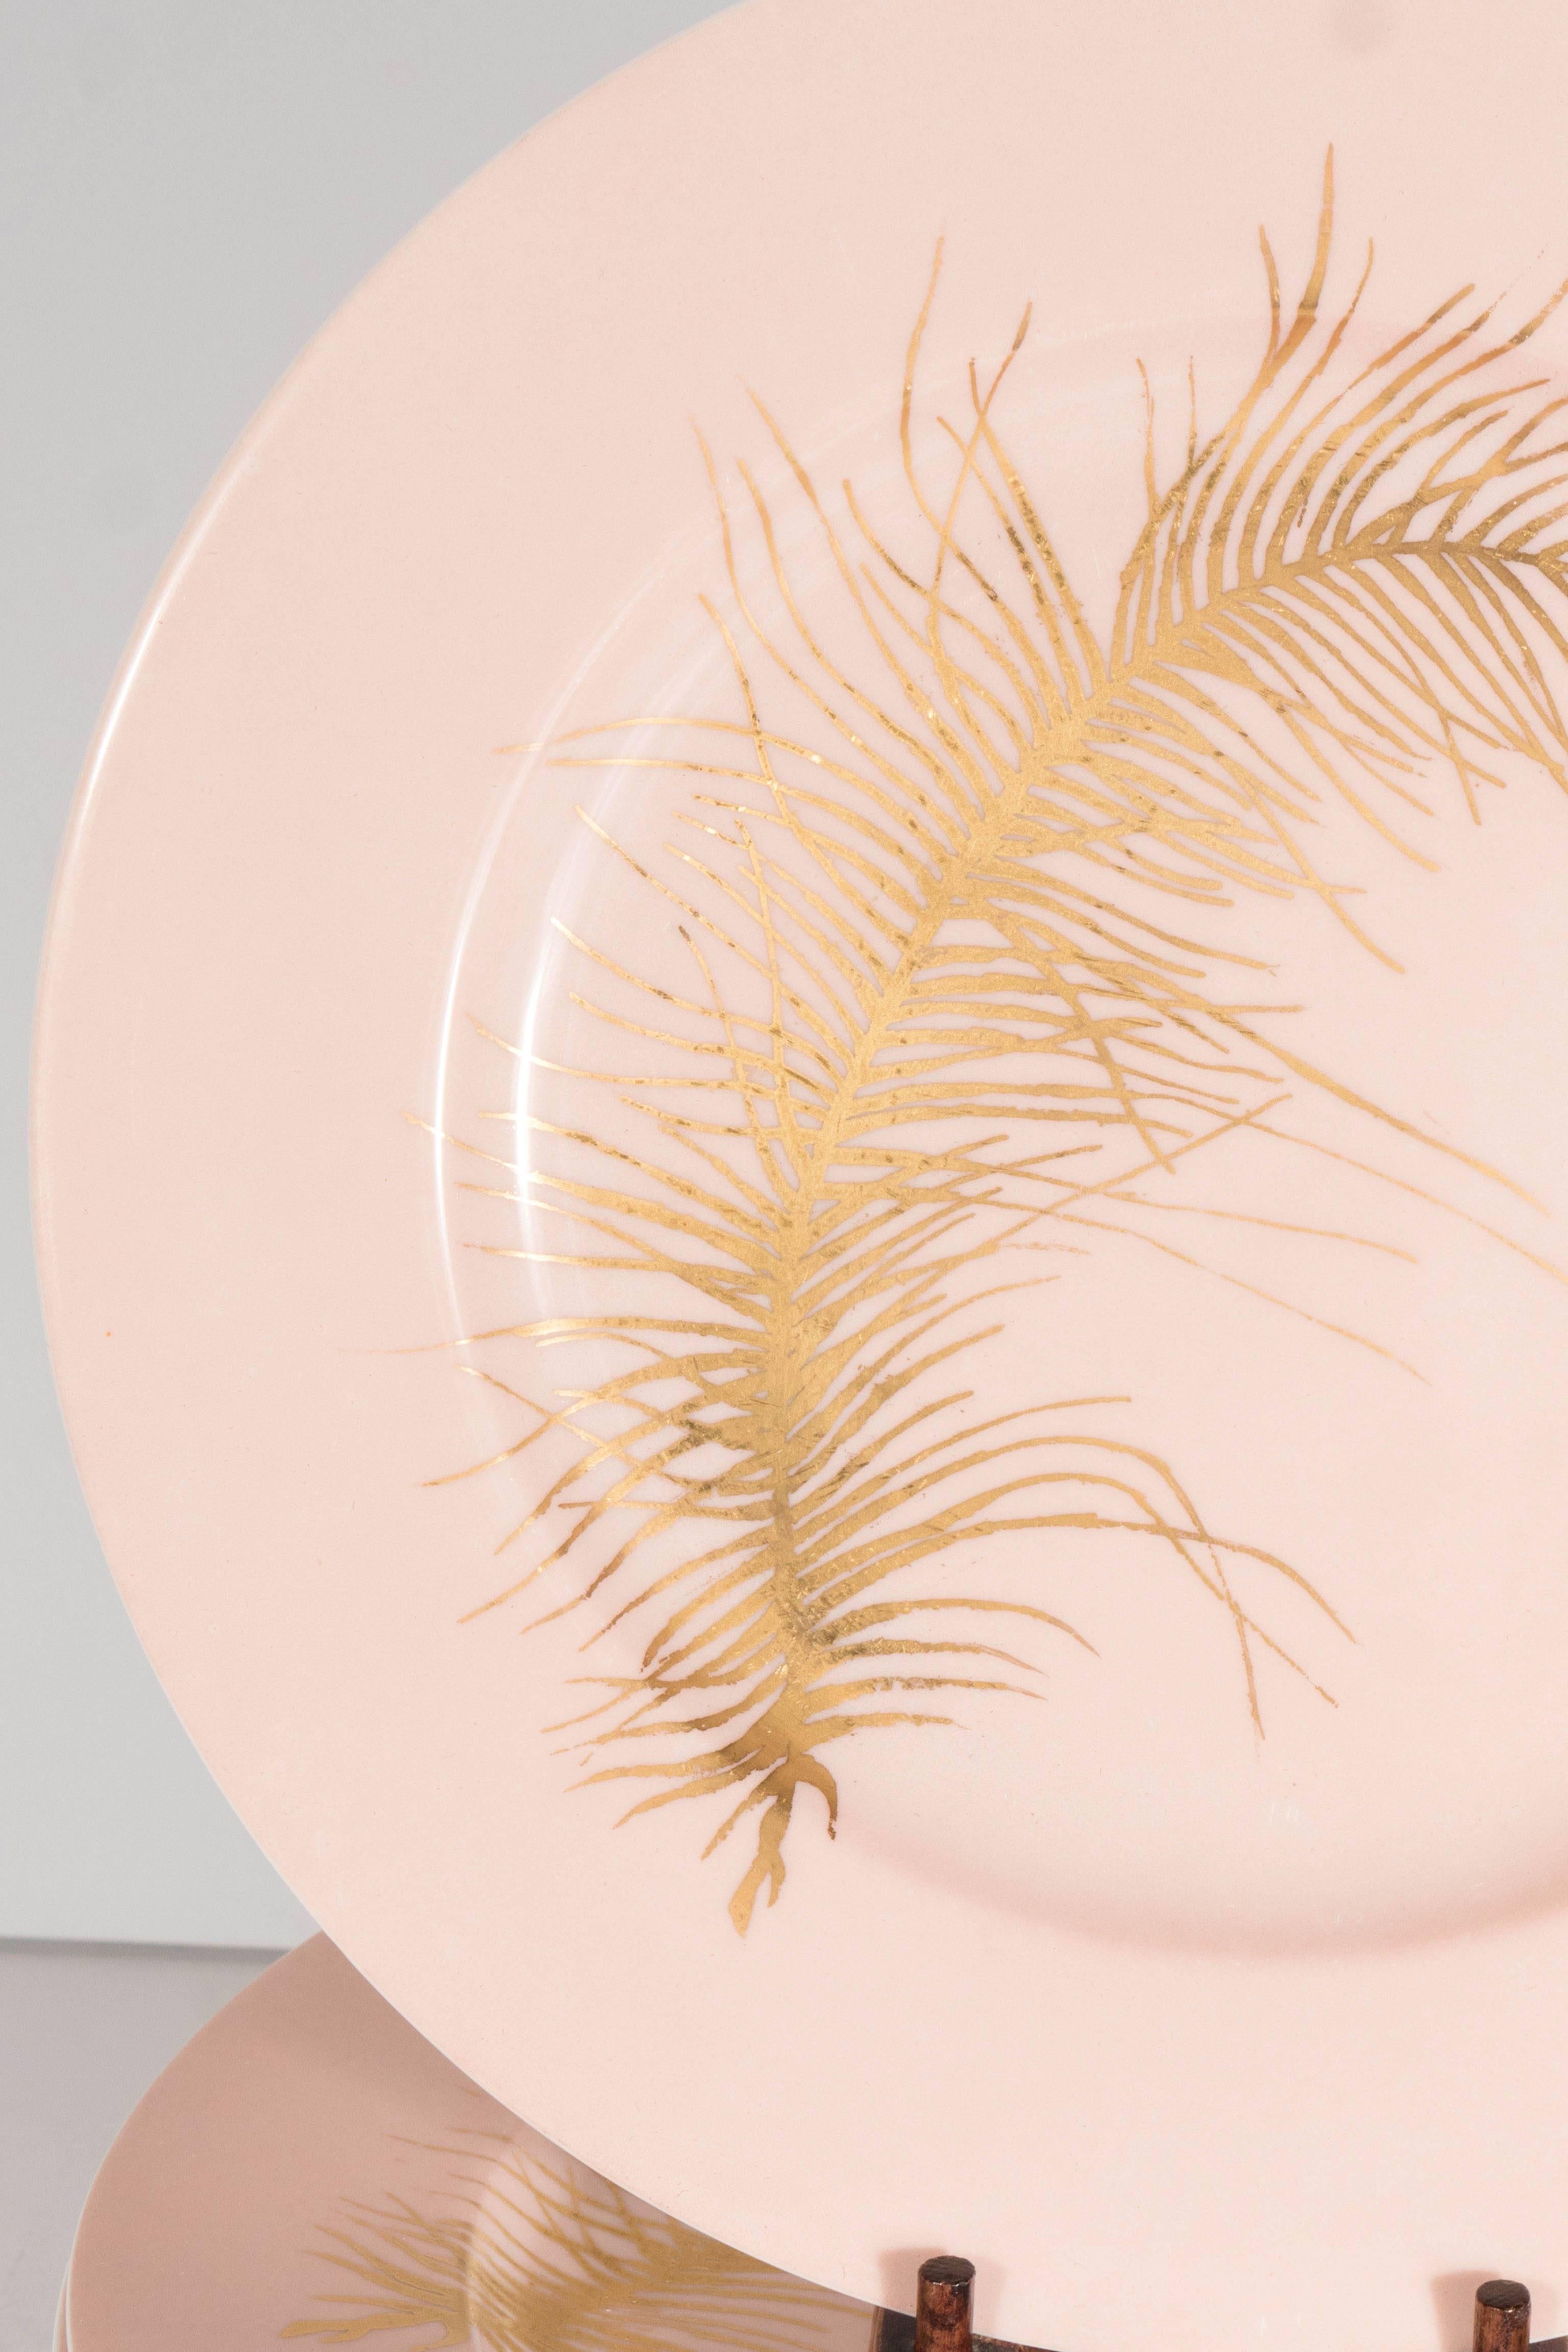 A beautiful set of eight dinner plates in pink with 24-Karat yellow gold feather or leaf detailing. Each piece featured a single feather or leaf depicted in wonderful detail. The matted salmon finish on the plate contrasts wonderfully with the gold